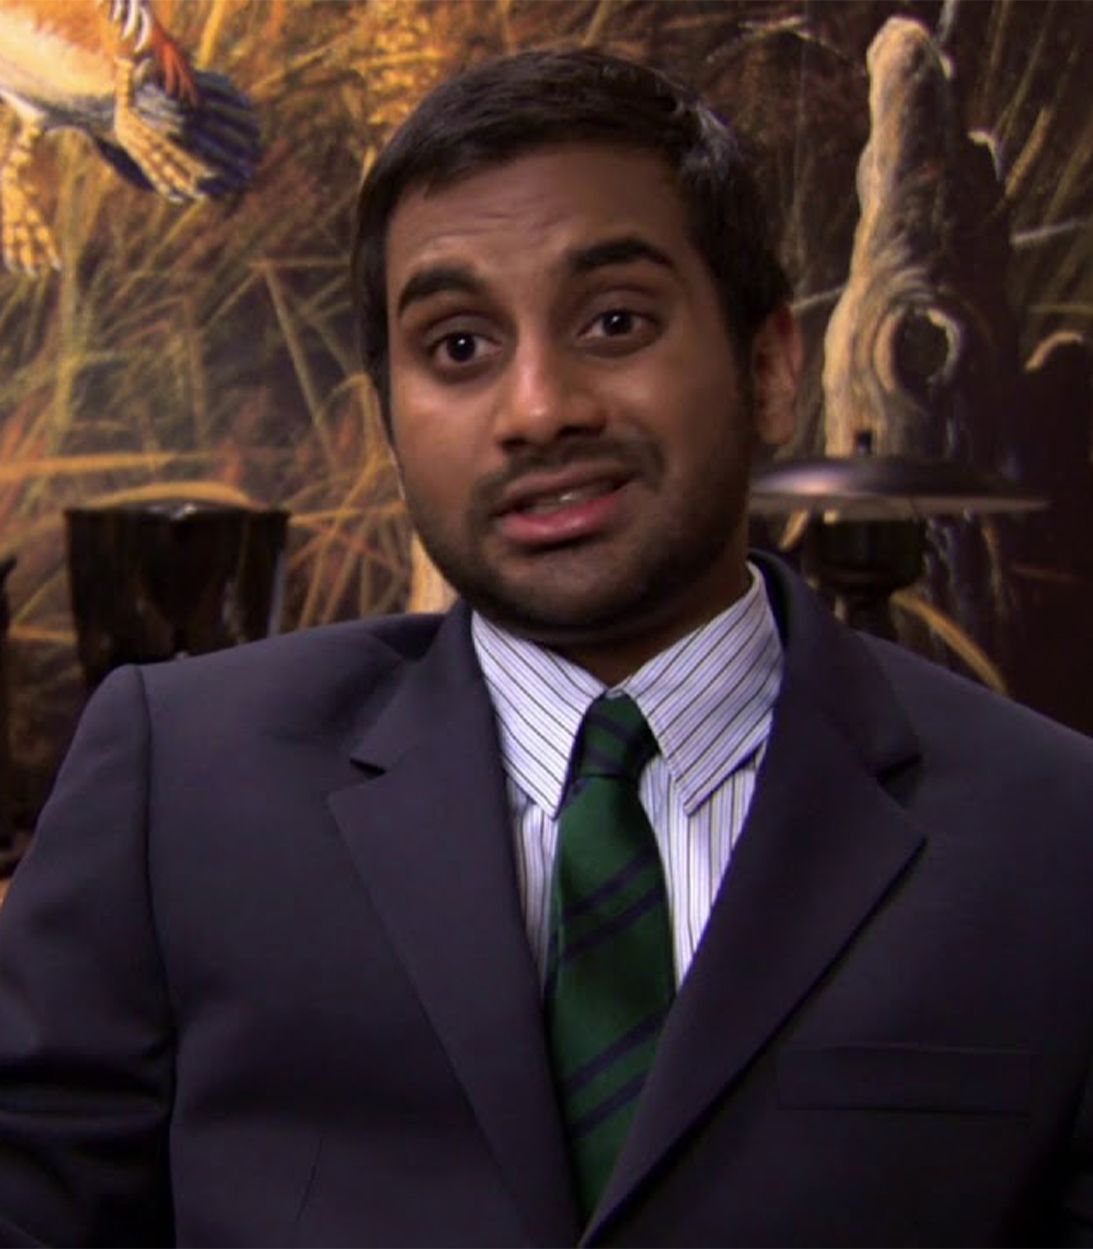 Tom Haverford as a DJ in the office